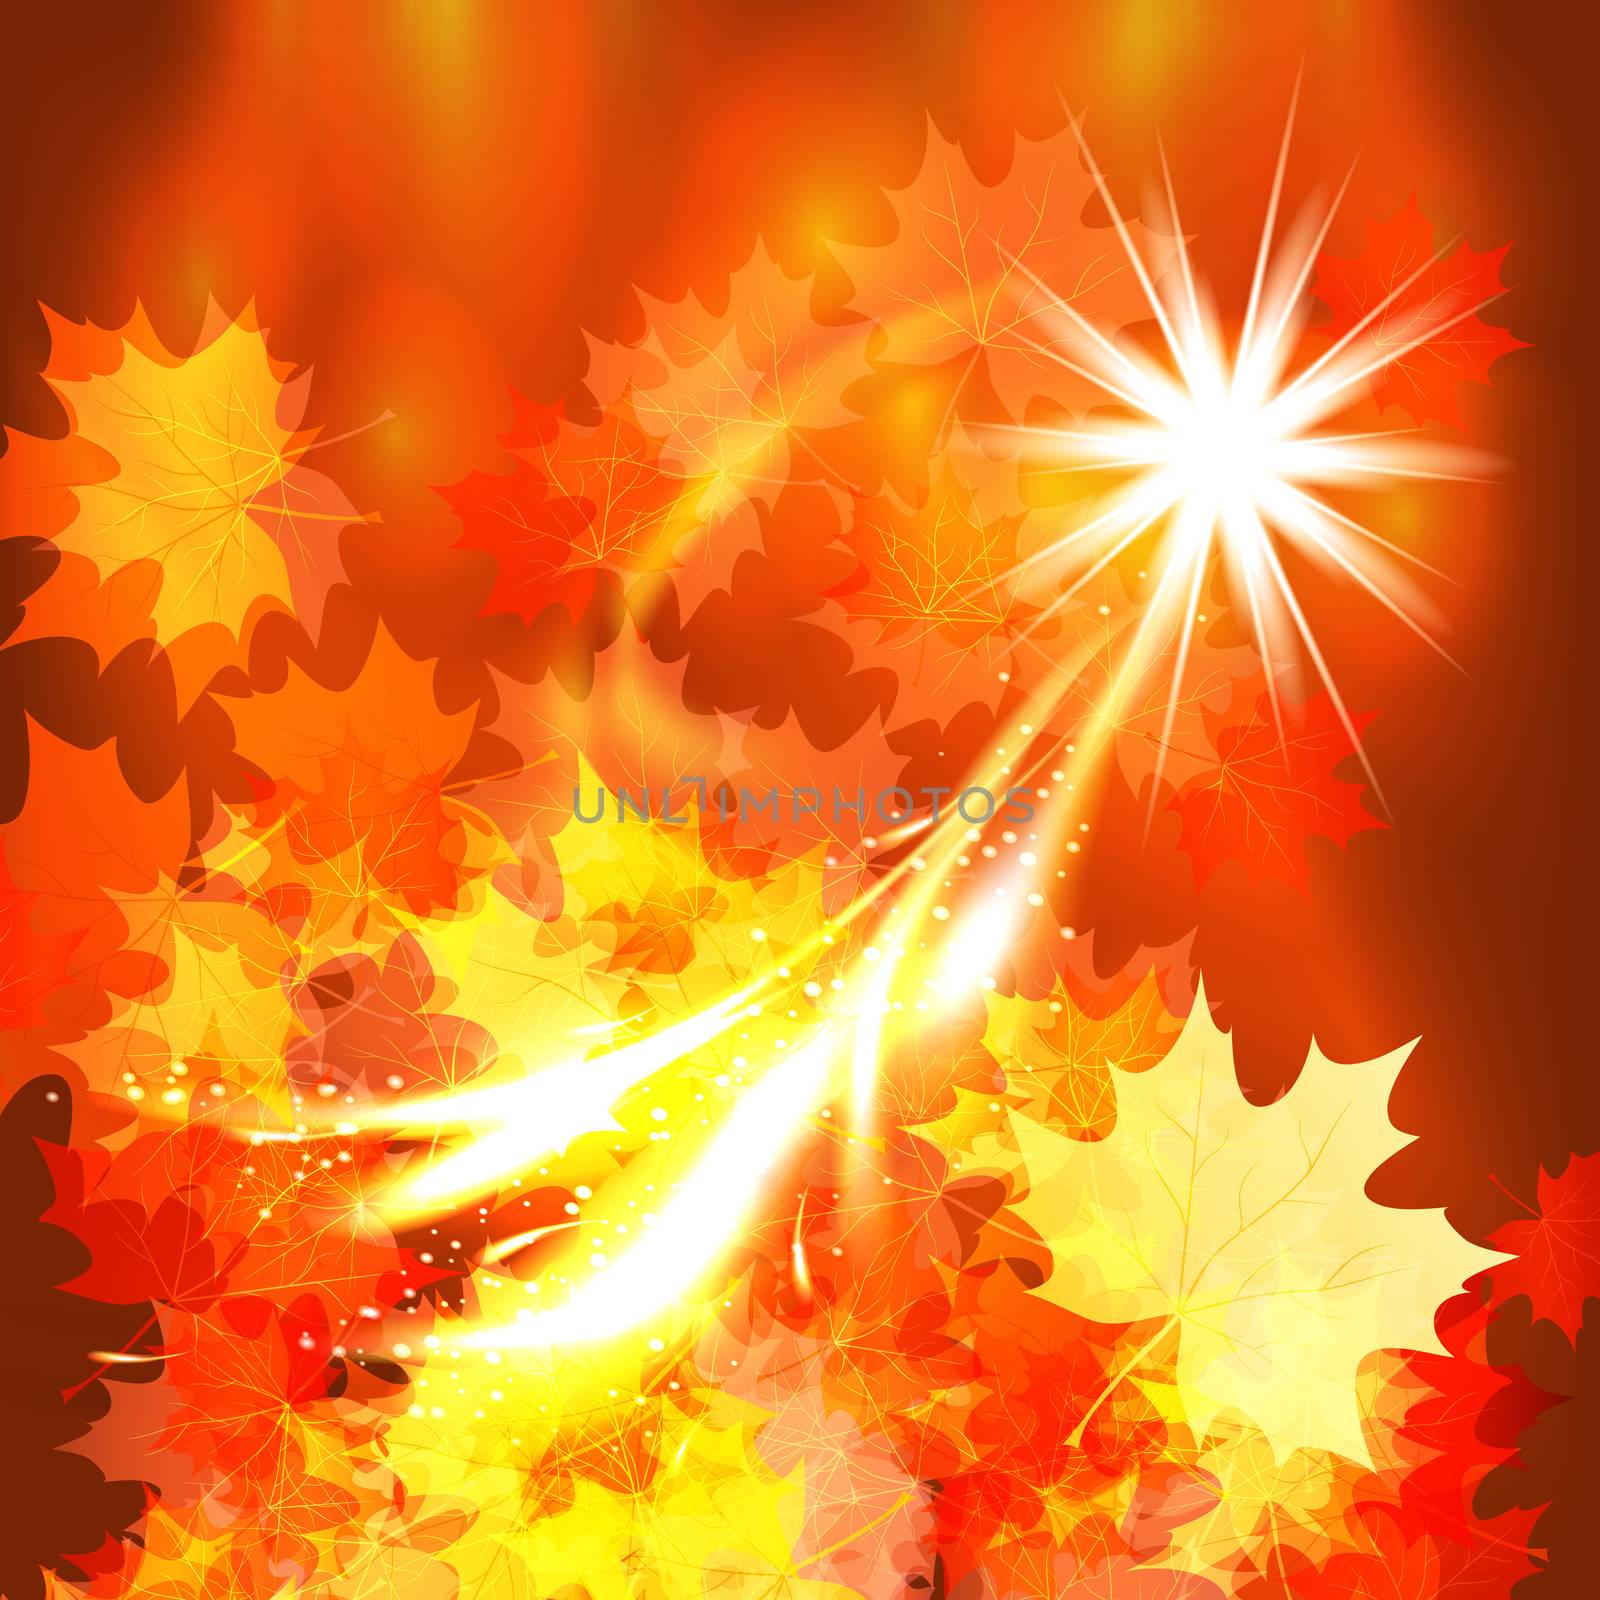 Autumn leaves design background. by Itana